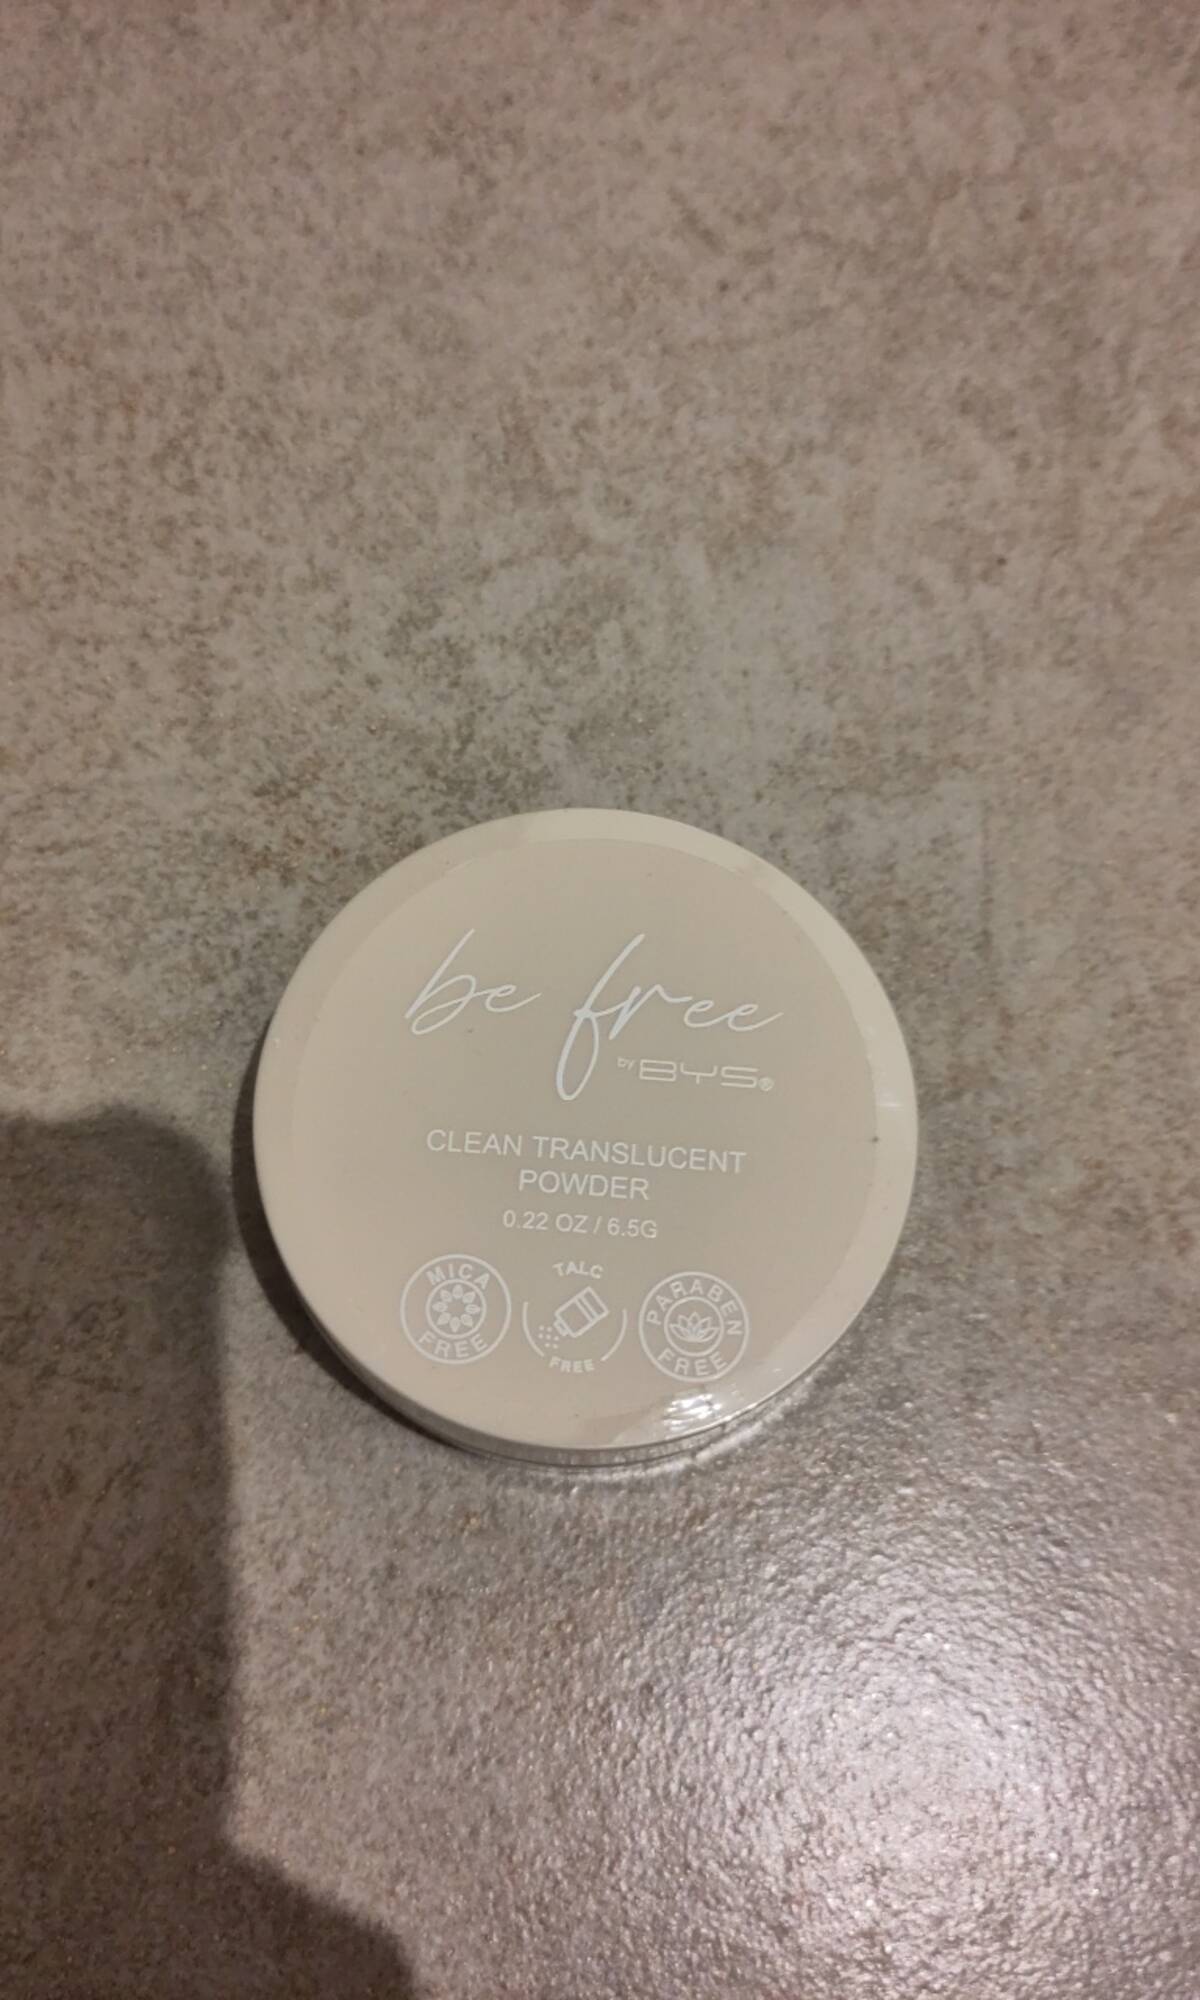 BYS - Be free - Clean translucent powder